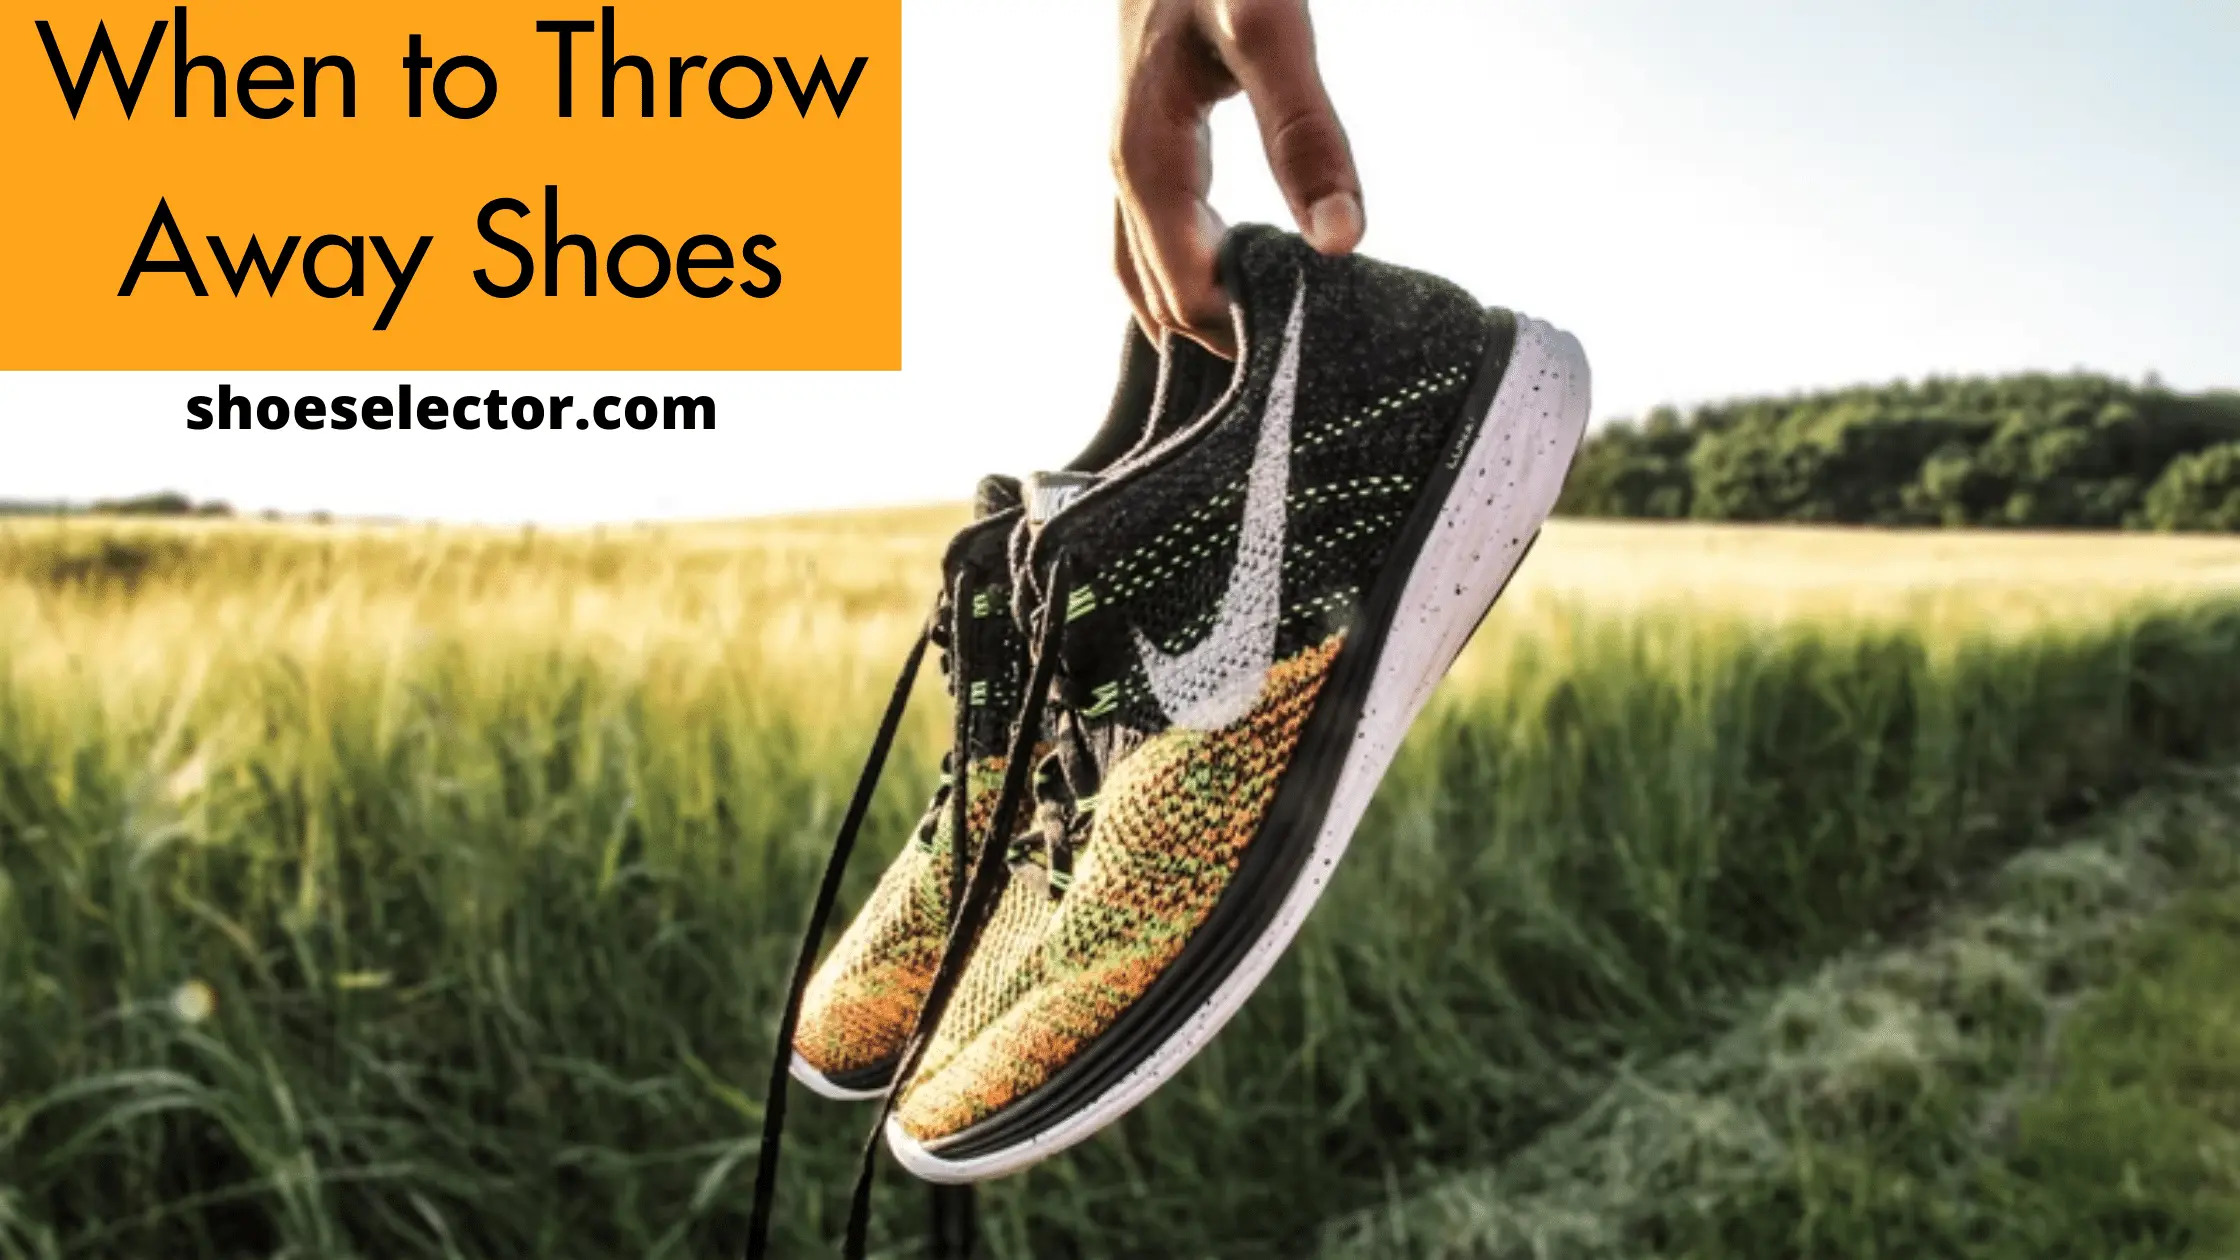 When to Throw Away Shoes? - Comprehensive Guide